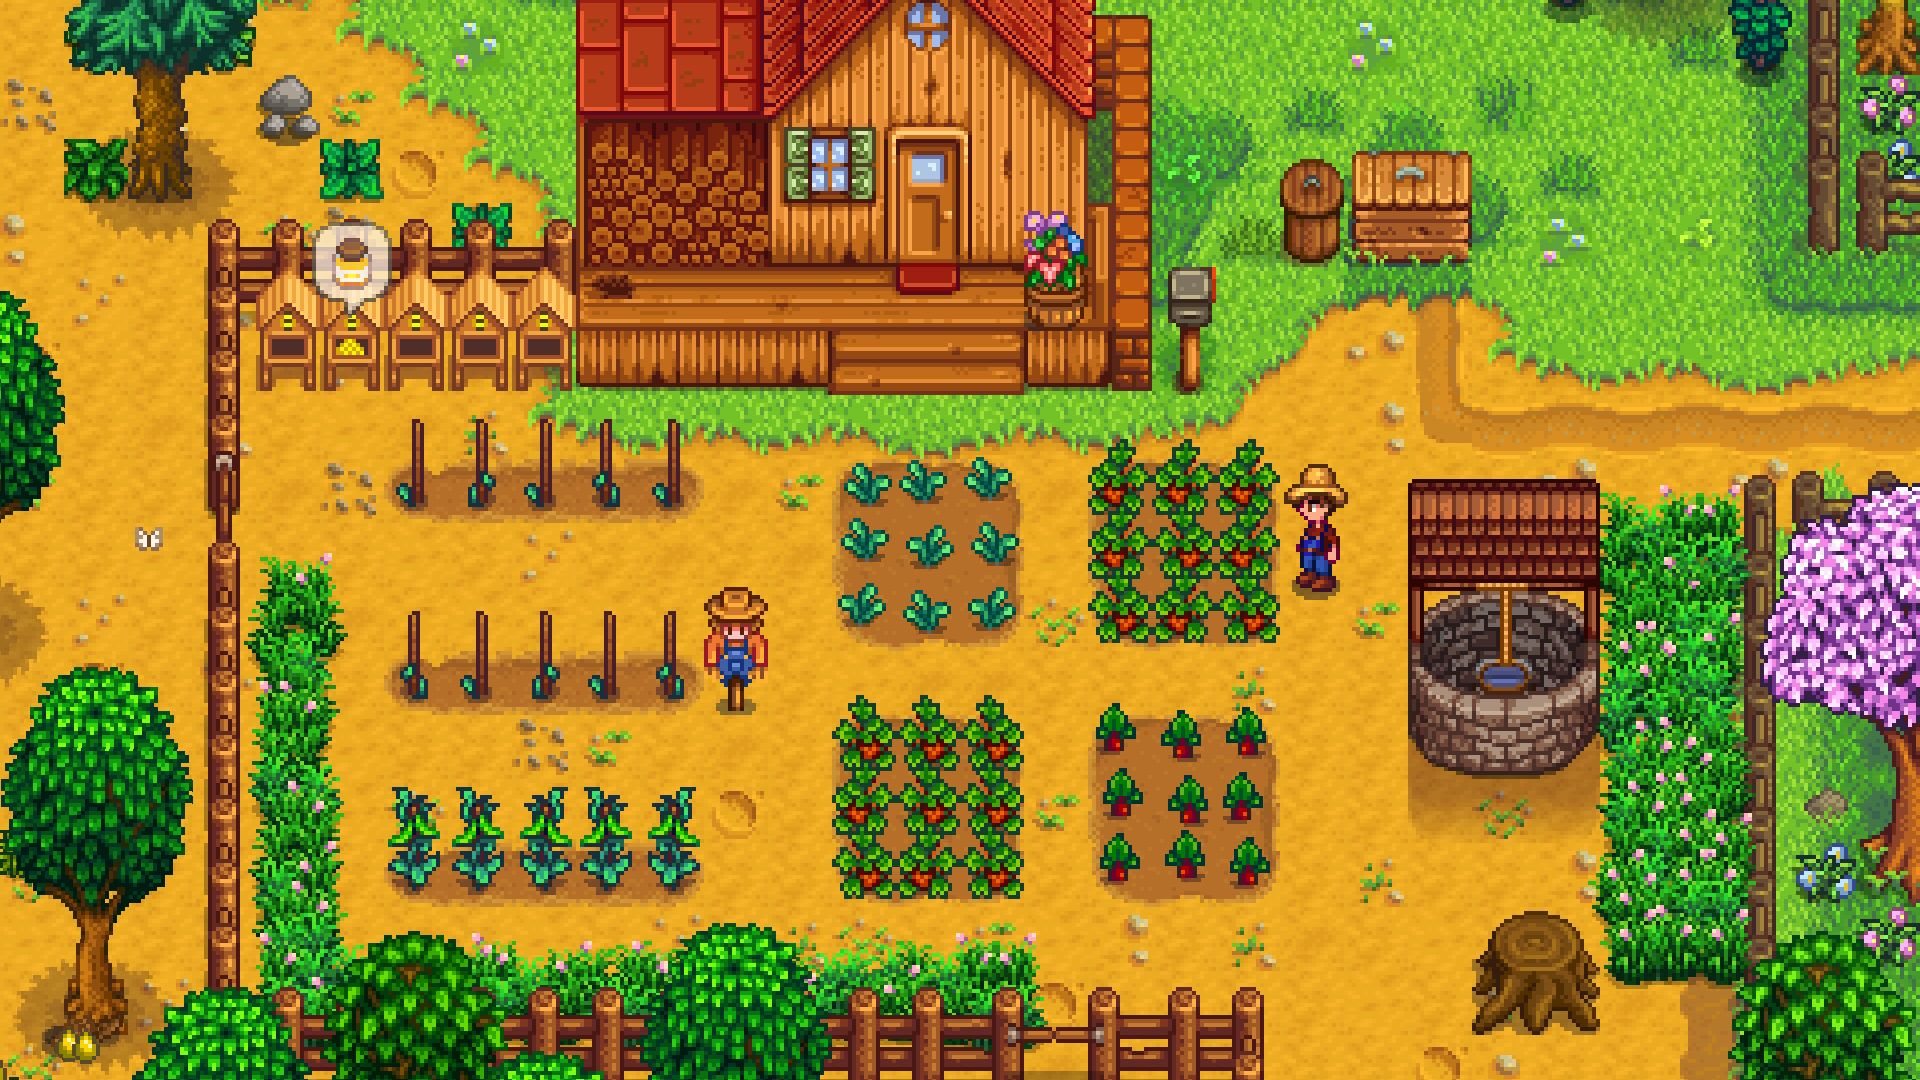 Stardew Valley is coming to the iPhone - The Verge